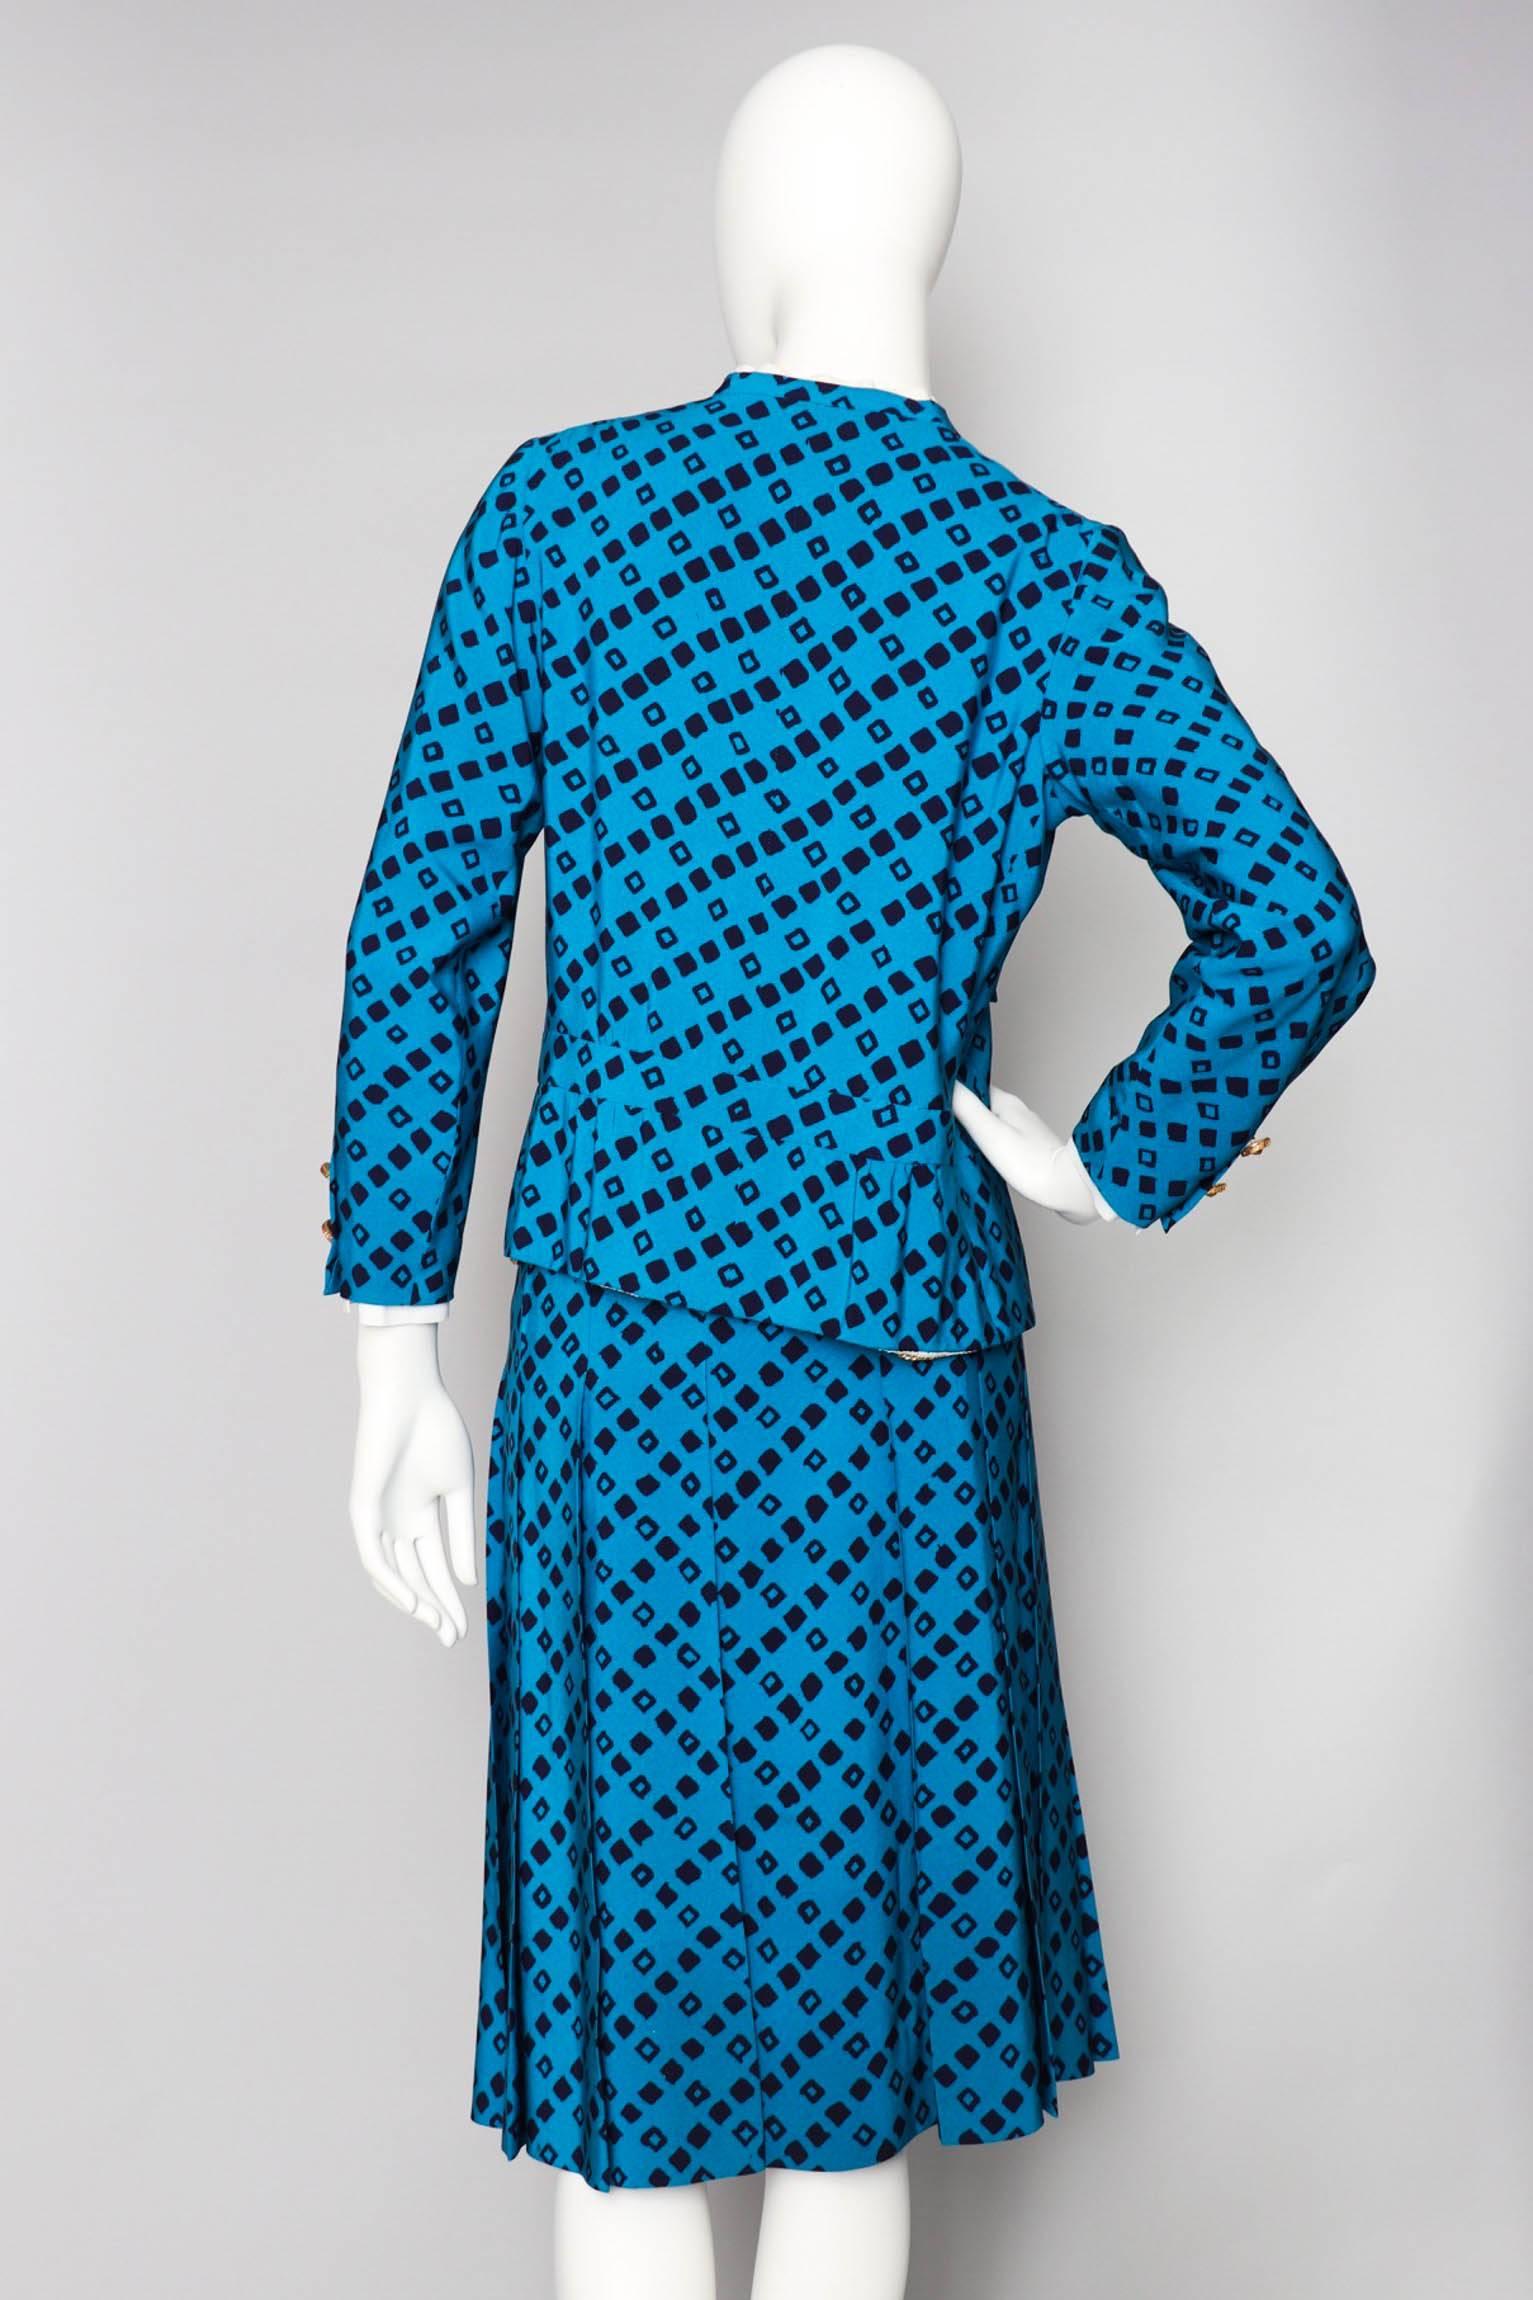 A stunning 1960s bright blue Chanel silk skirt suit with black graphic print consisting of a pleated skirt and fitted jacket. The jacket has a rounded neckline with a white ruffled and detachable cotton collar and white detachable cuffs. In the